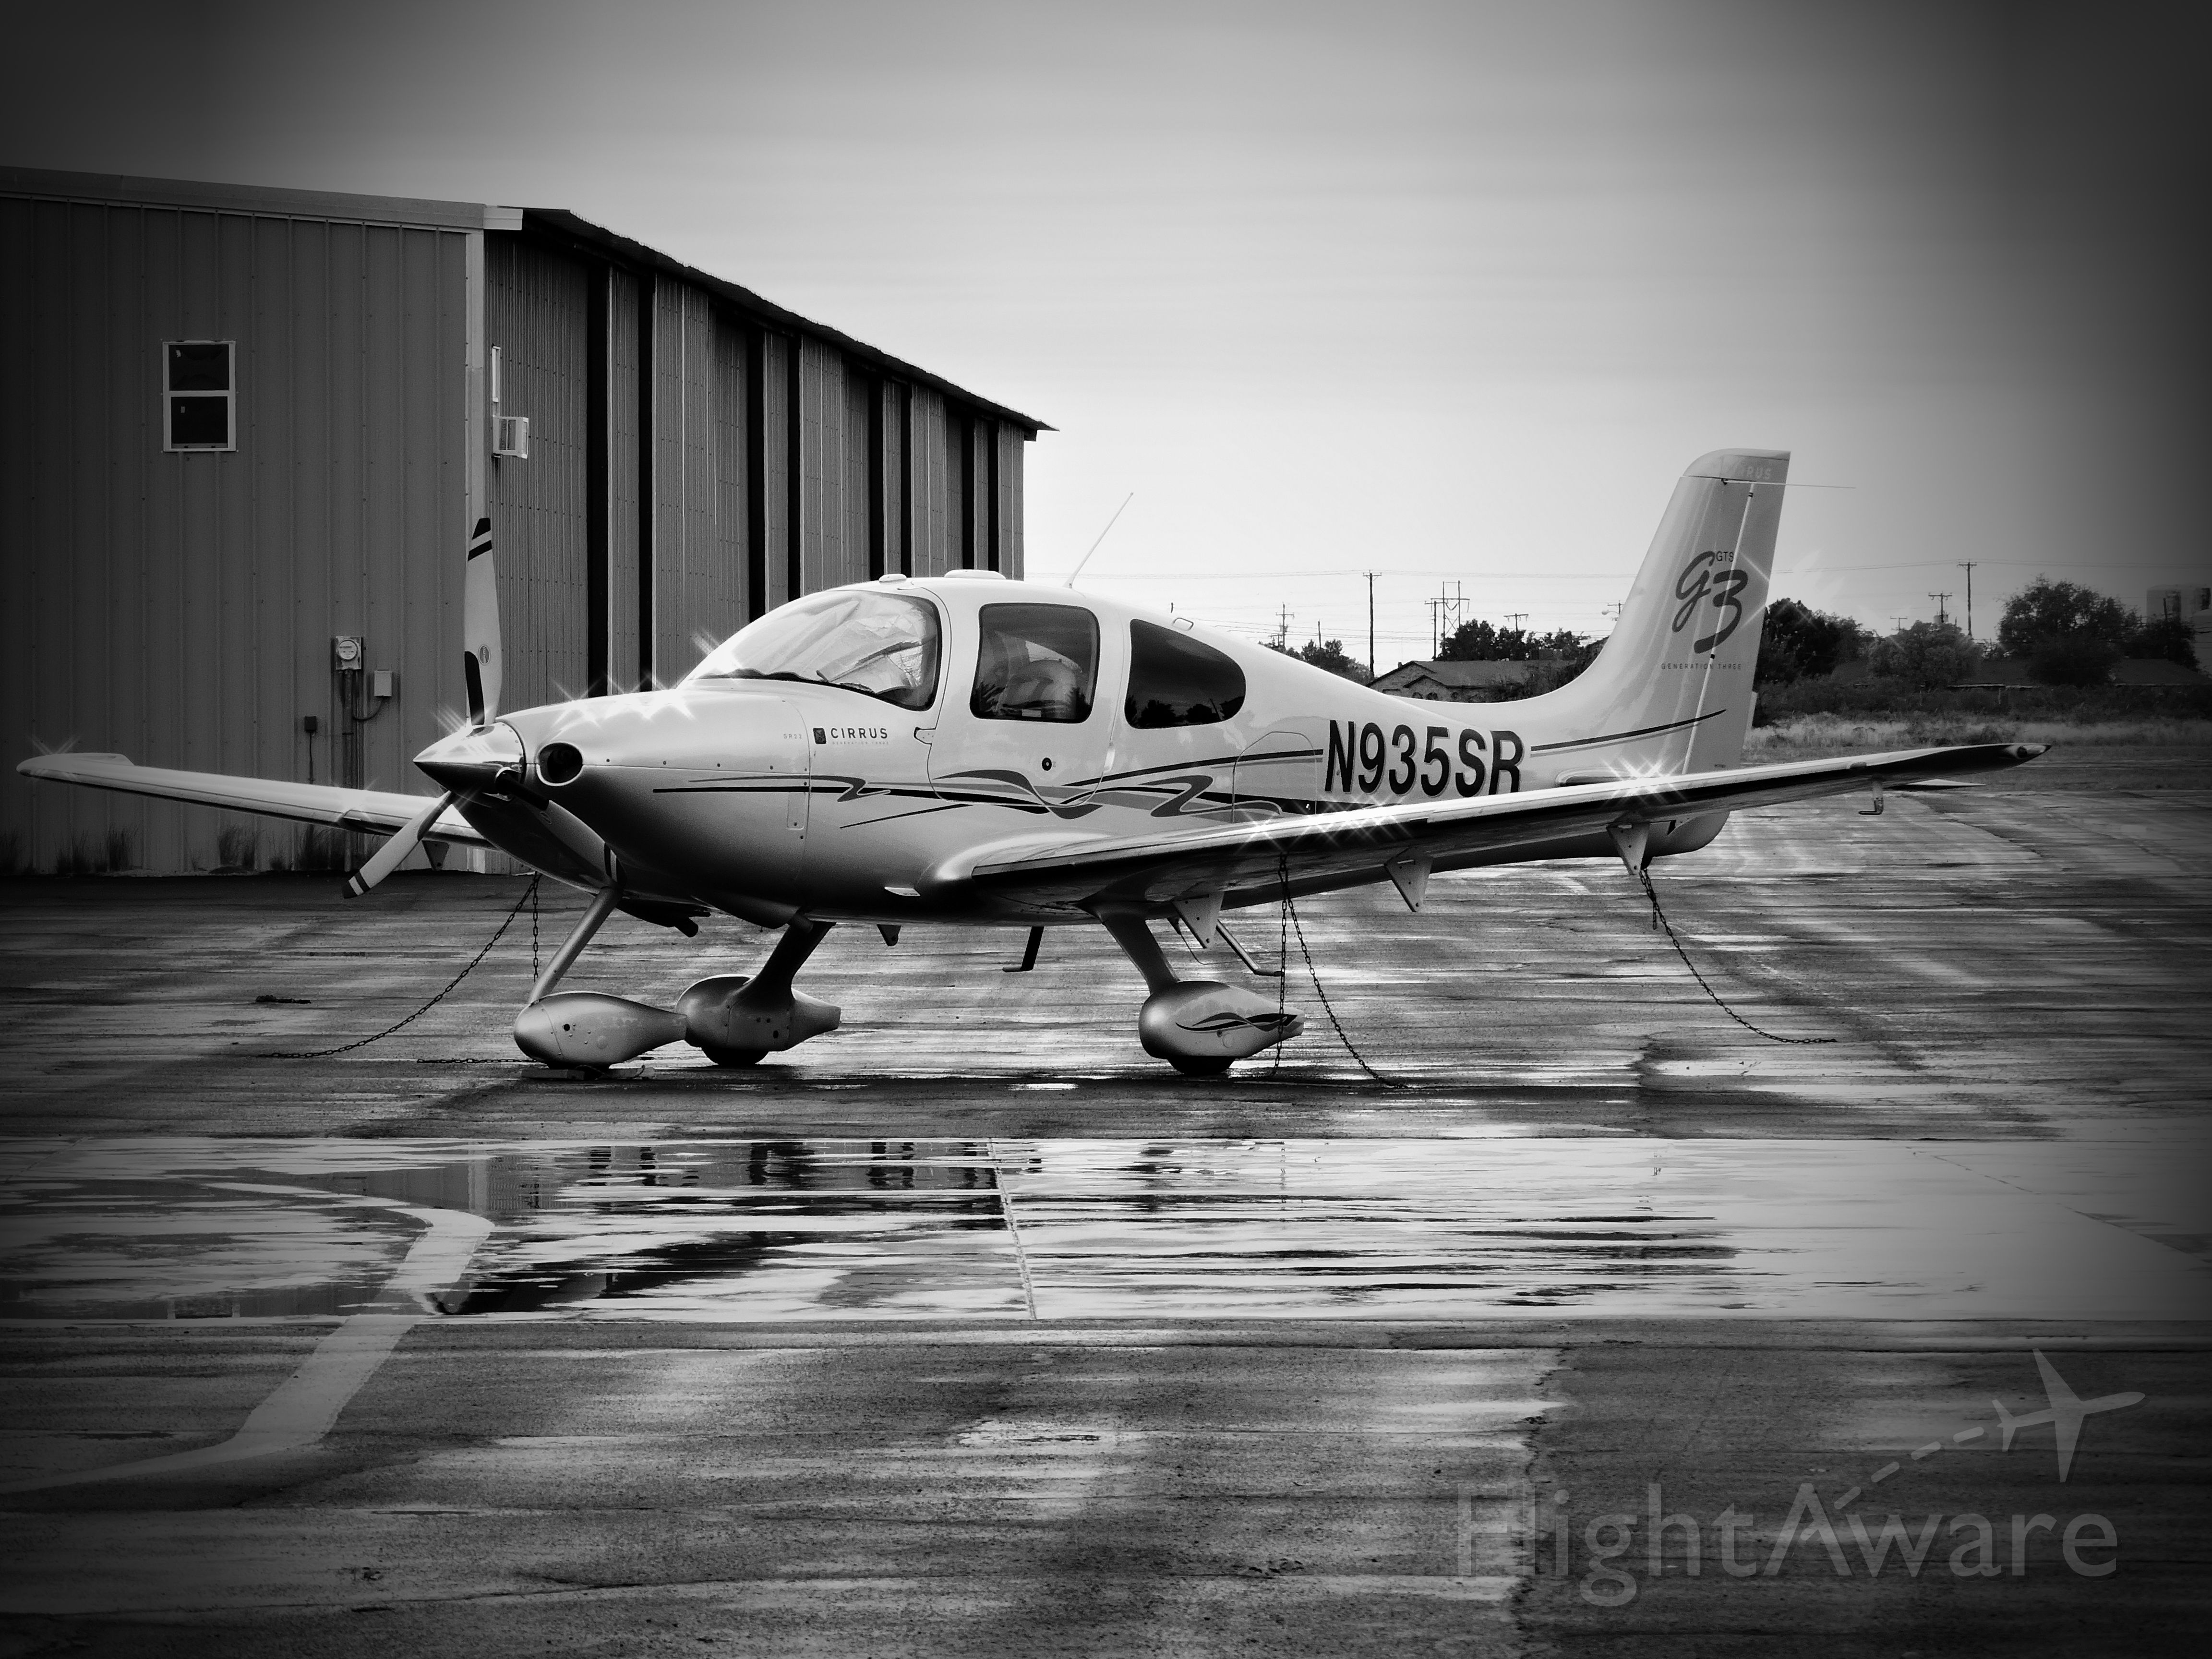 Cirrus SR-22 (N935SR) - Taken Thanksgiving weekend 2016 at Roy Hurd Municipal Airport in Monahans, Texas.  Rainy weekend but it made for a good monochrome shot.